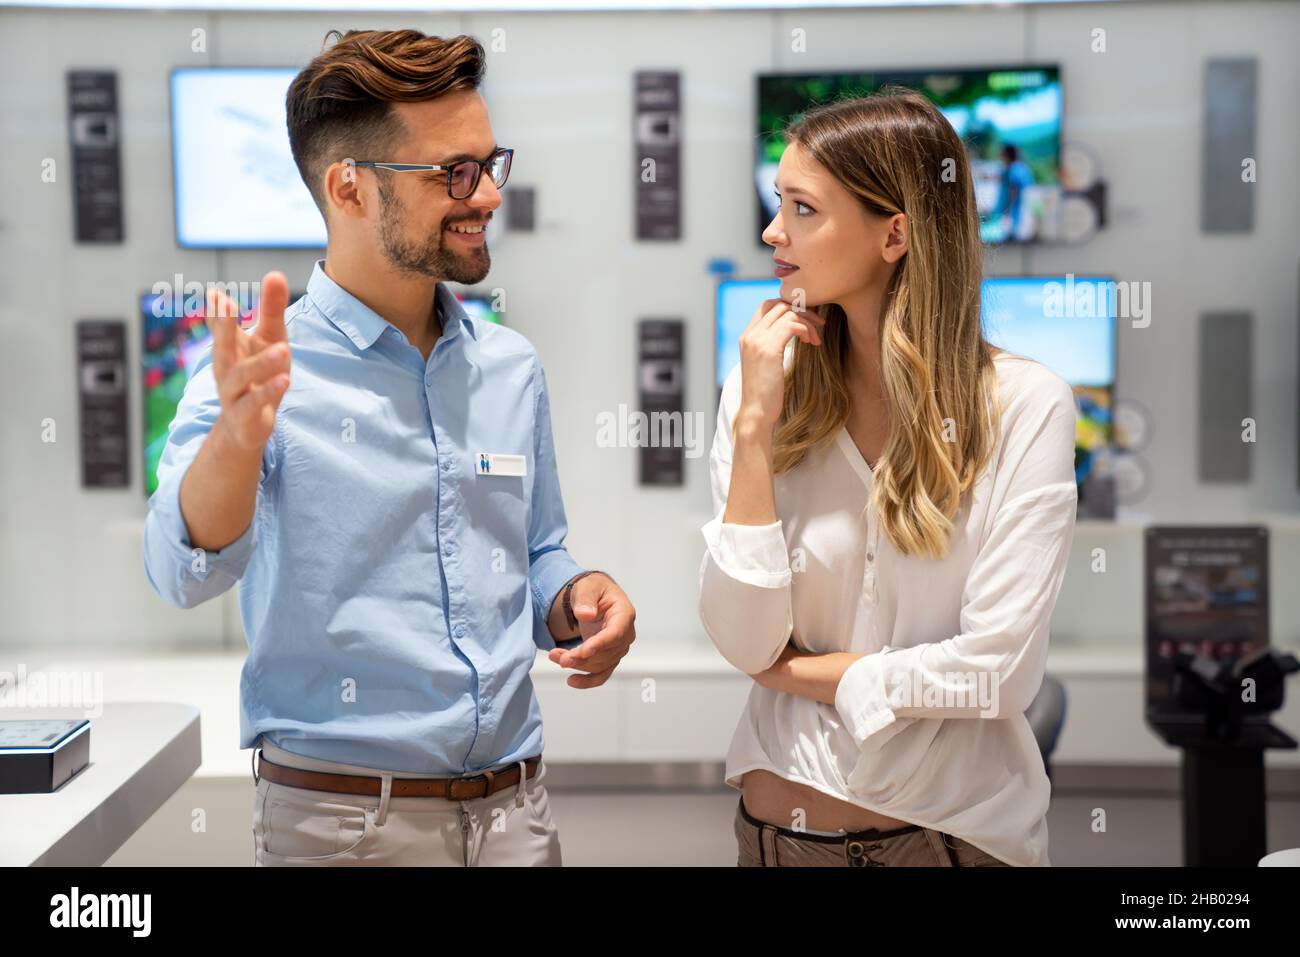 Happy people in consumer electronics retail store looking at new digital device Stock Photo